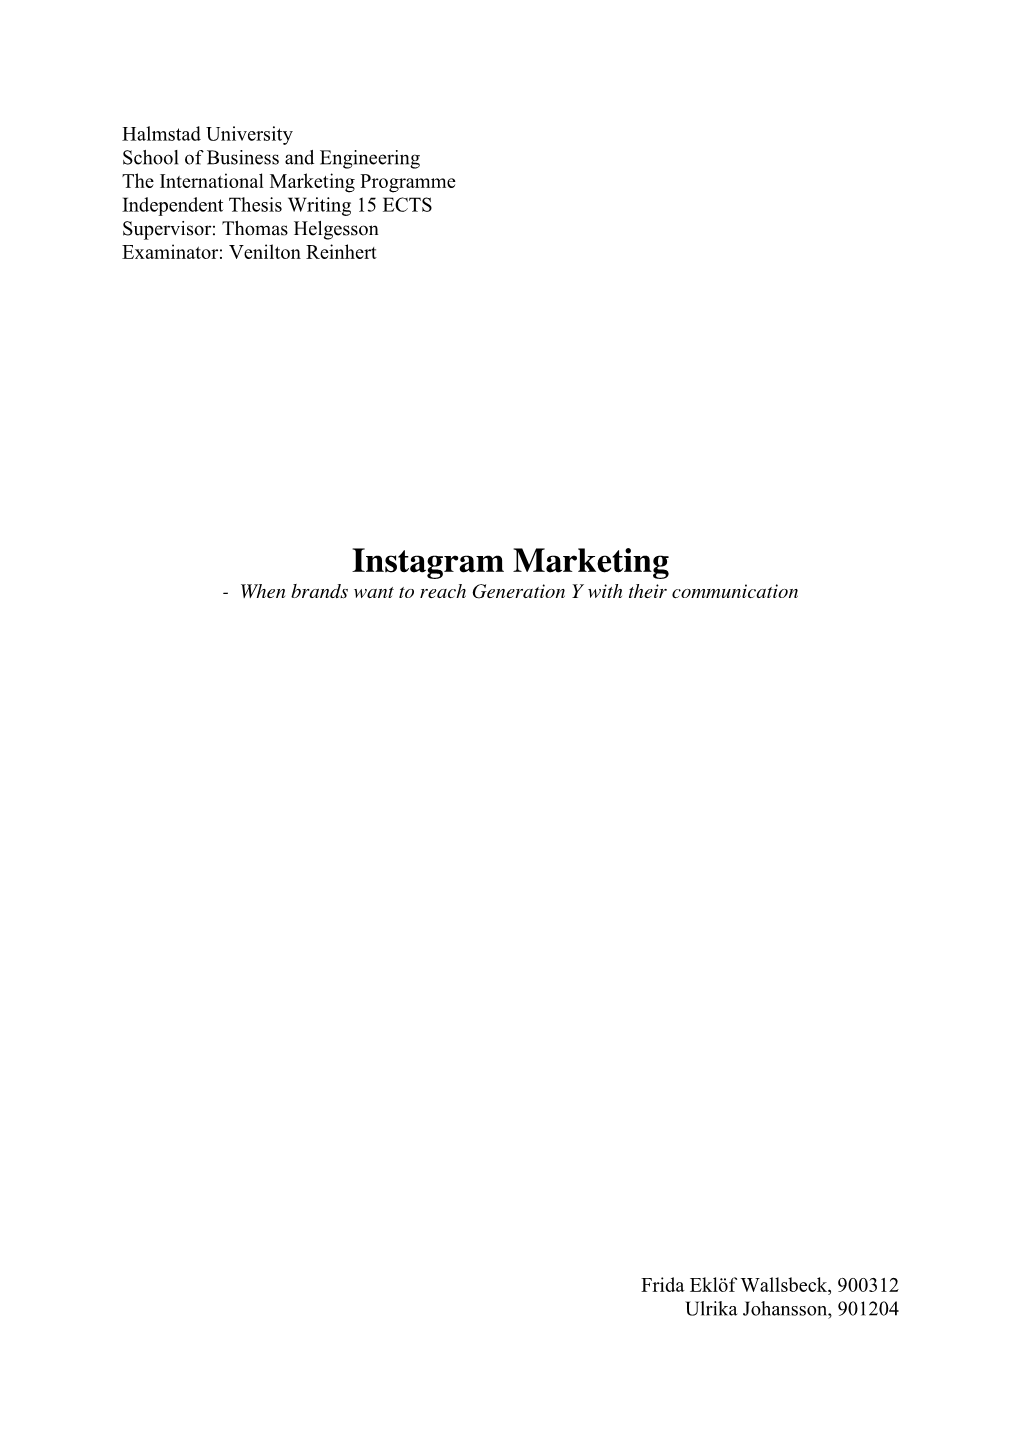 Instagram Marketing - When Brands Want to Reach Generation Y with Their Communication